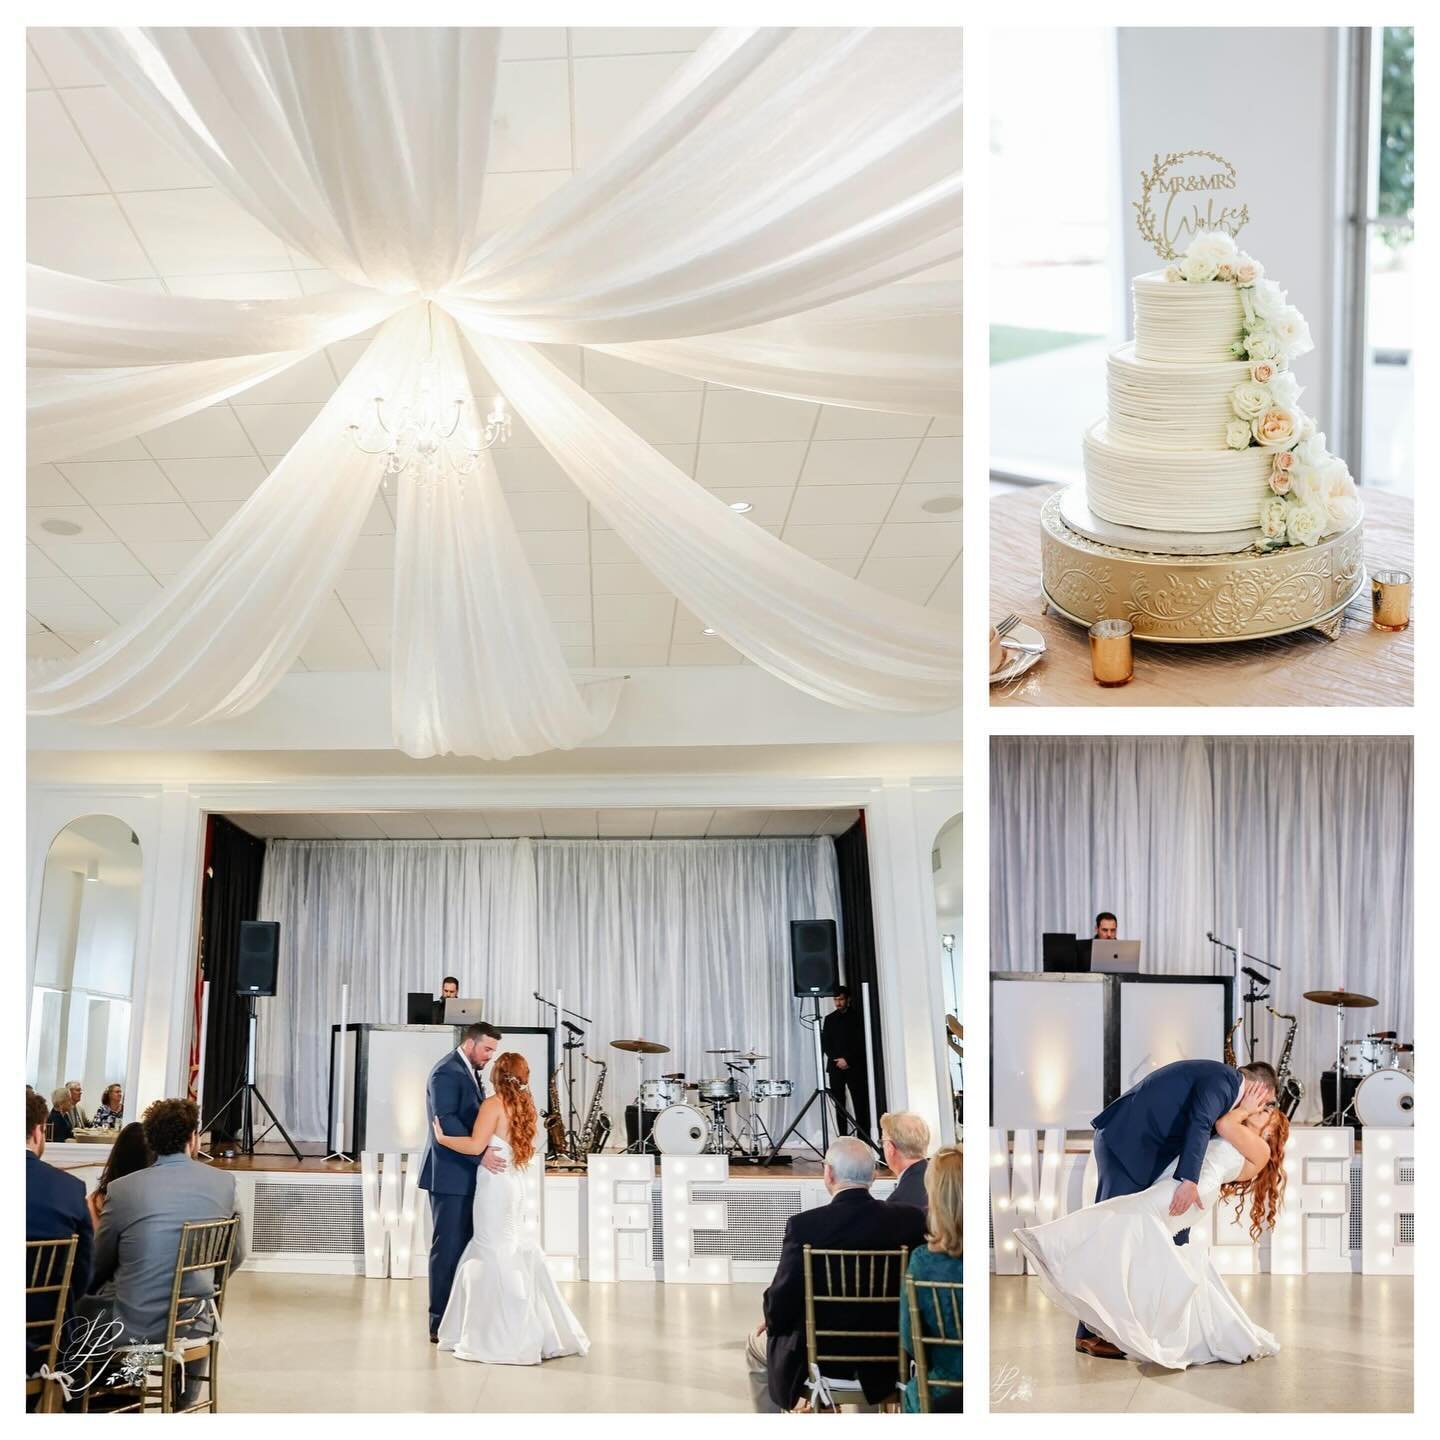 Lovely wedding at the Tampa Garden Club. We provided the Draped Ceiling Starburst, Stage Draping, &amp; Gold Cake Stand. Pleasure working with Olive Tree Weddings, Jennie&rsquo;s Flowers, &amp; Reign Beauty Collective! &mdash;&mdash;&mdash;&mdash;&md